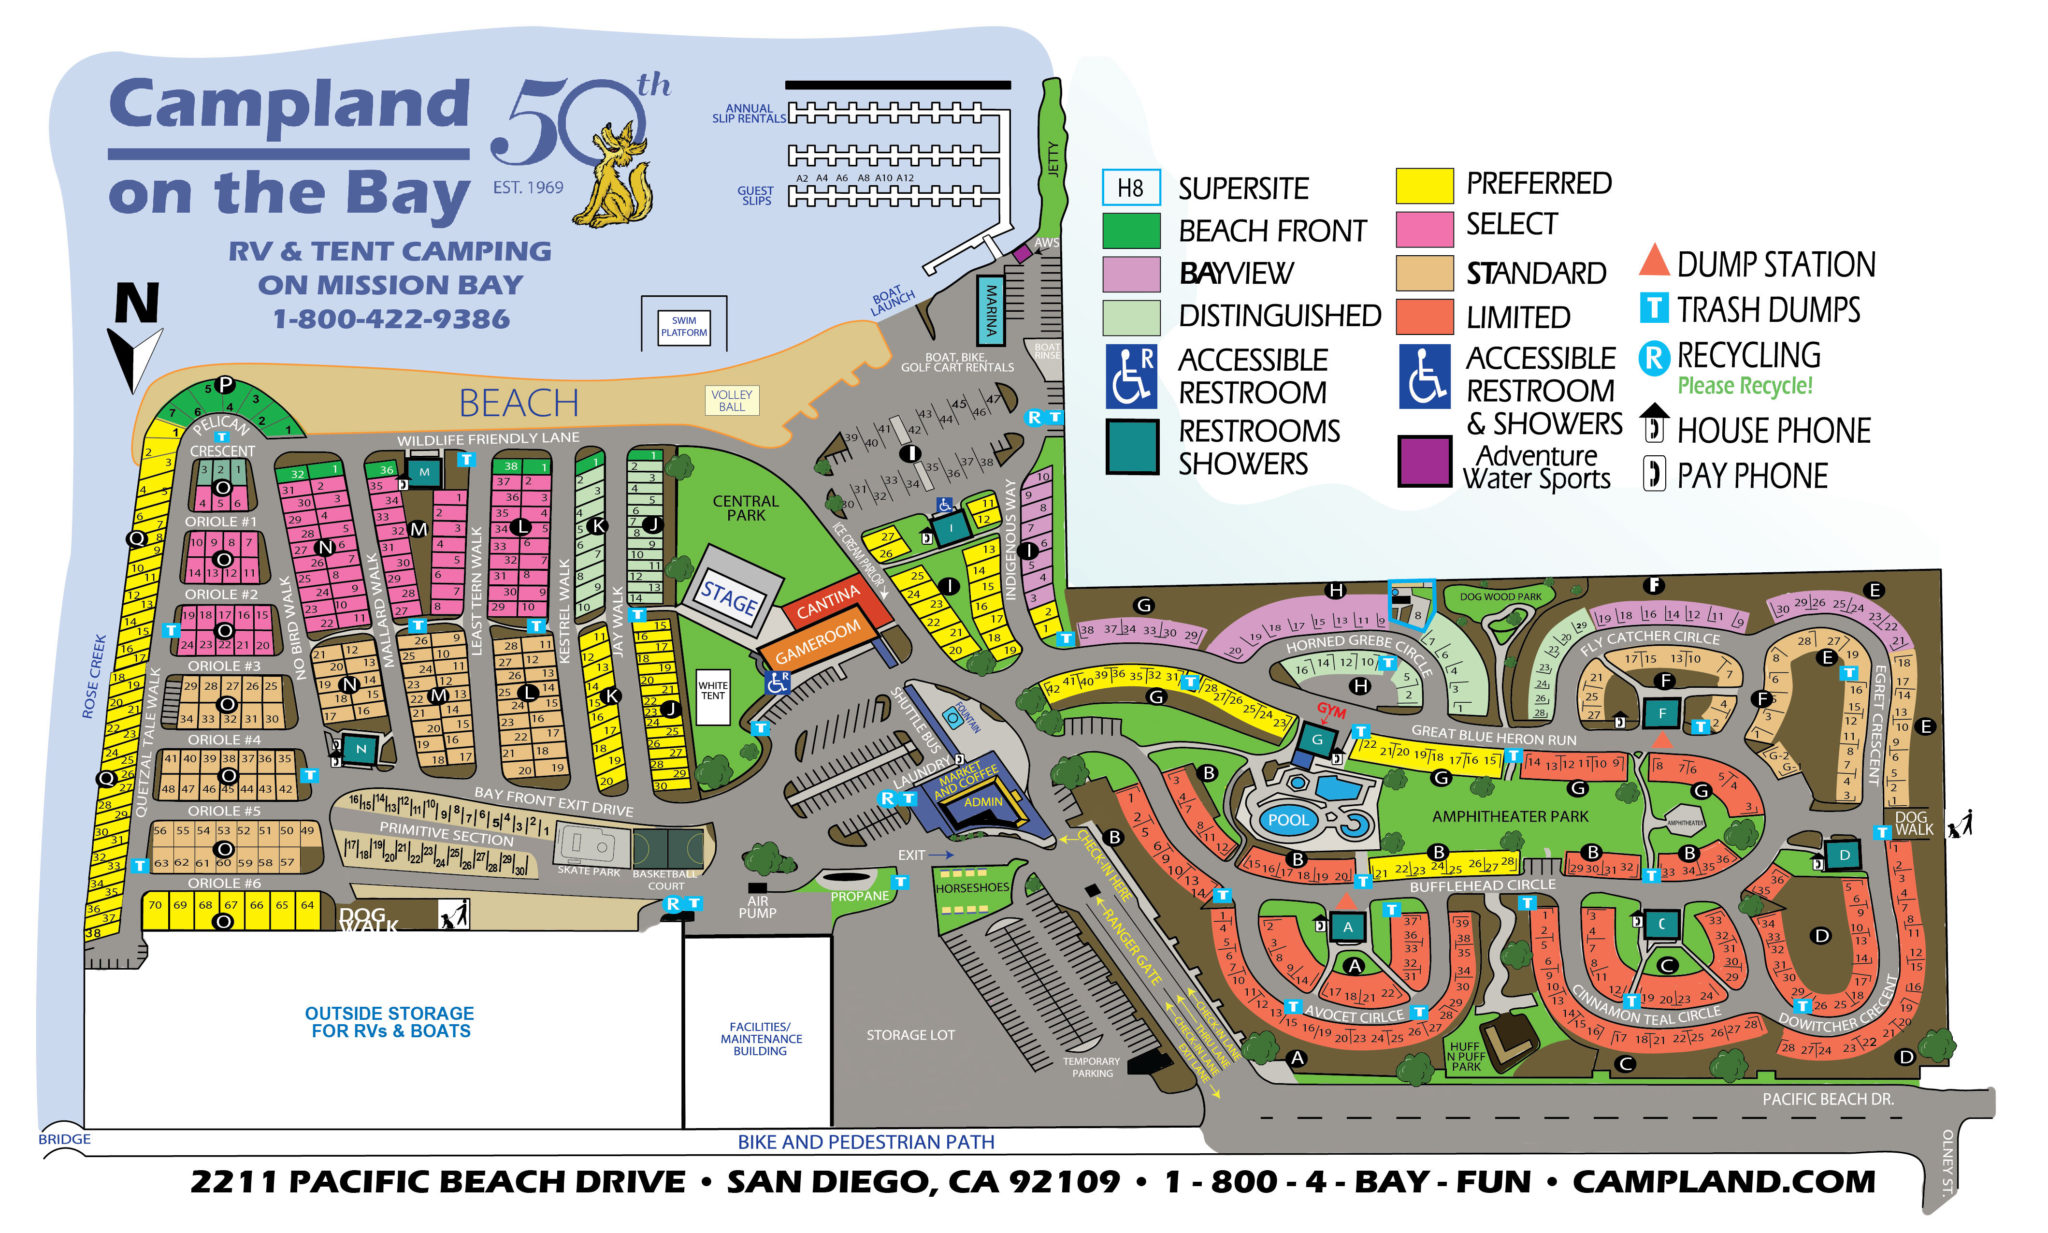 Resort Map For Campland On The Bay Campland On The Bay